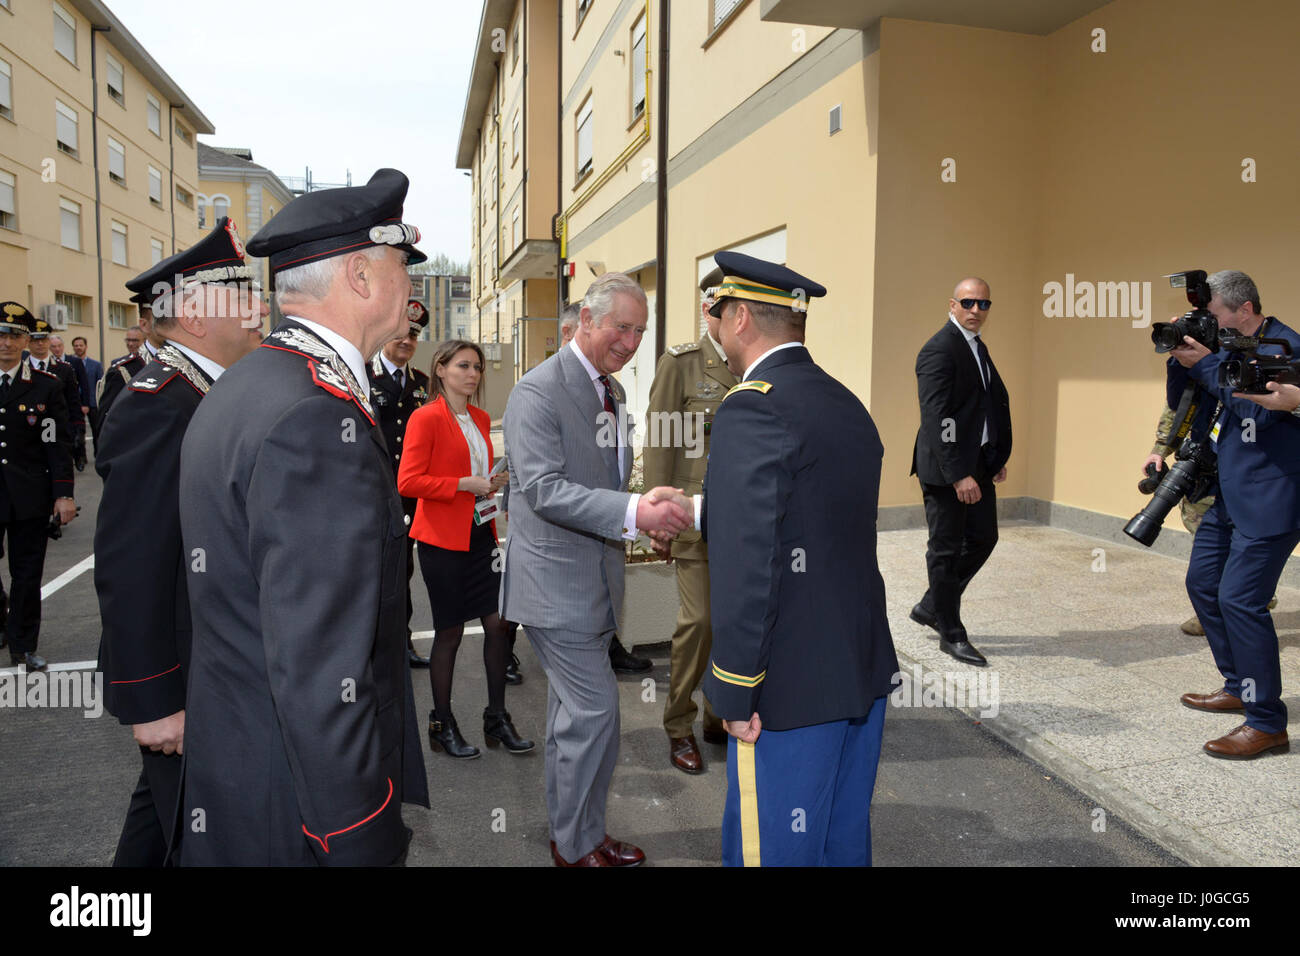 The Royal Highness, Prince Charles, Prince of Wales, meets U.S. Army Col. Darius S. Gallegos, CoESPU deputy director (right) during visit at Center of Excellence for Stability Police Units (CoESPU) Vicenza, Italy, April 1, 2017. (U.S. Army Photo by Visual Information Specialist Antonio Bedin/released) Stock Photo